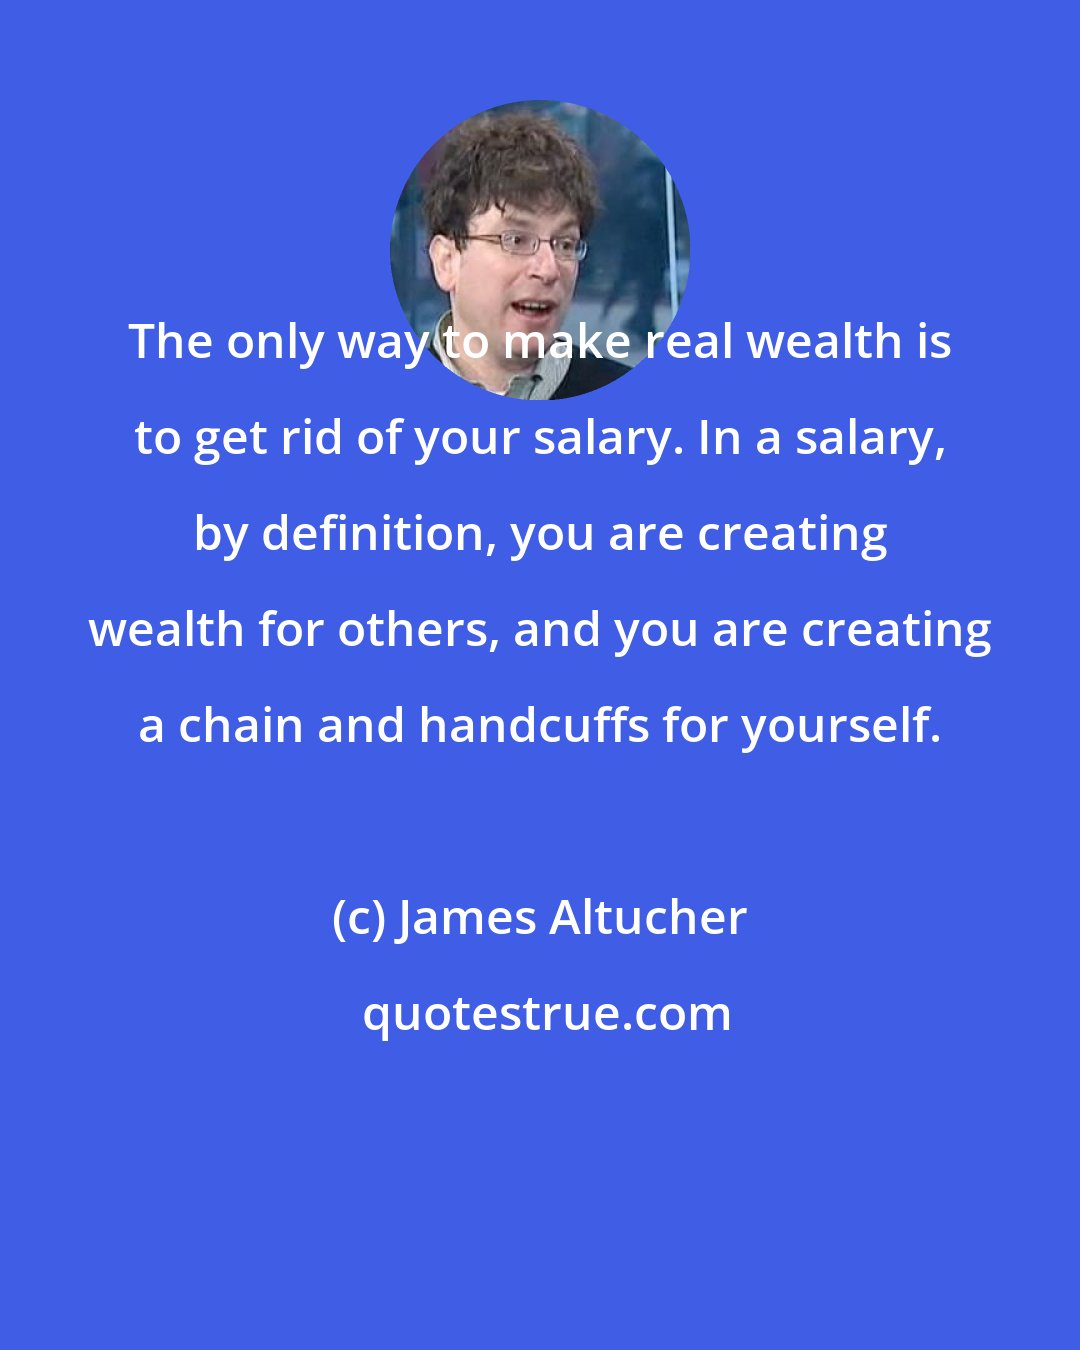 James Altucher: The only way to make real wealth is to get rid of your salary. In a salary, by definition, you are creating wealth for others, and you are creating a chain and handcuffs for yourself.